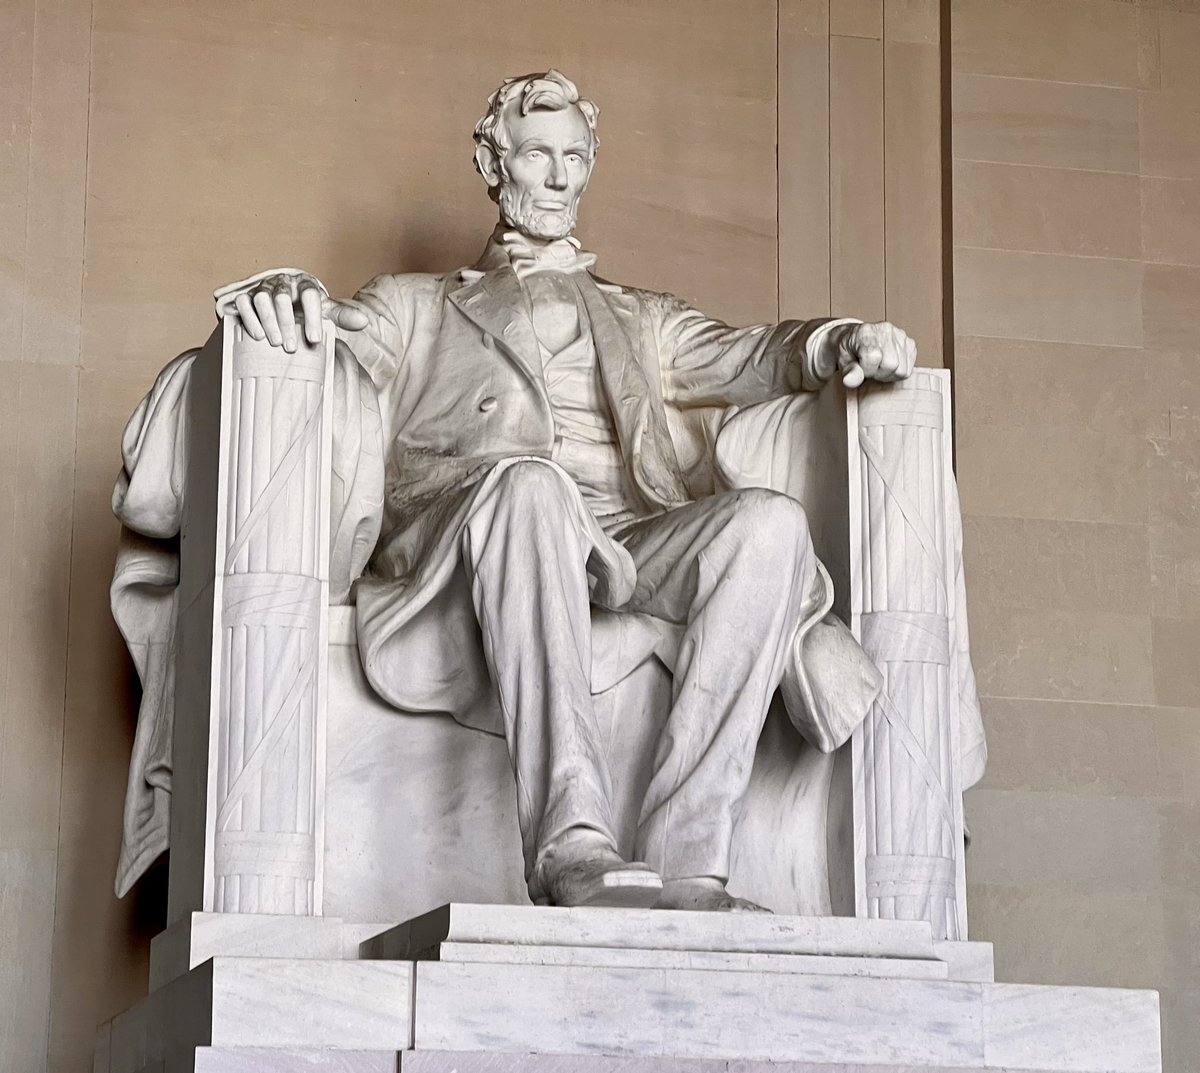 I’m celebrating this Presidents’ Day in Washington DC! Here’s one of my favorites. Lincoln refers to the “great task remaining before us” in his Gettysburg address. The monuments and memorials honor our past but also can inspire and empower us to look forward.